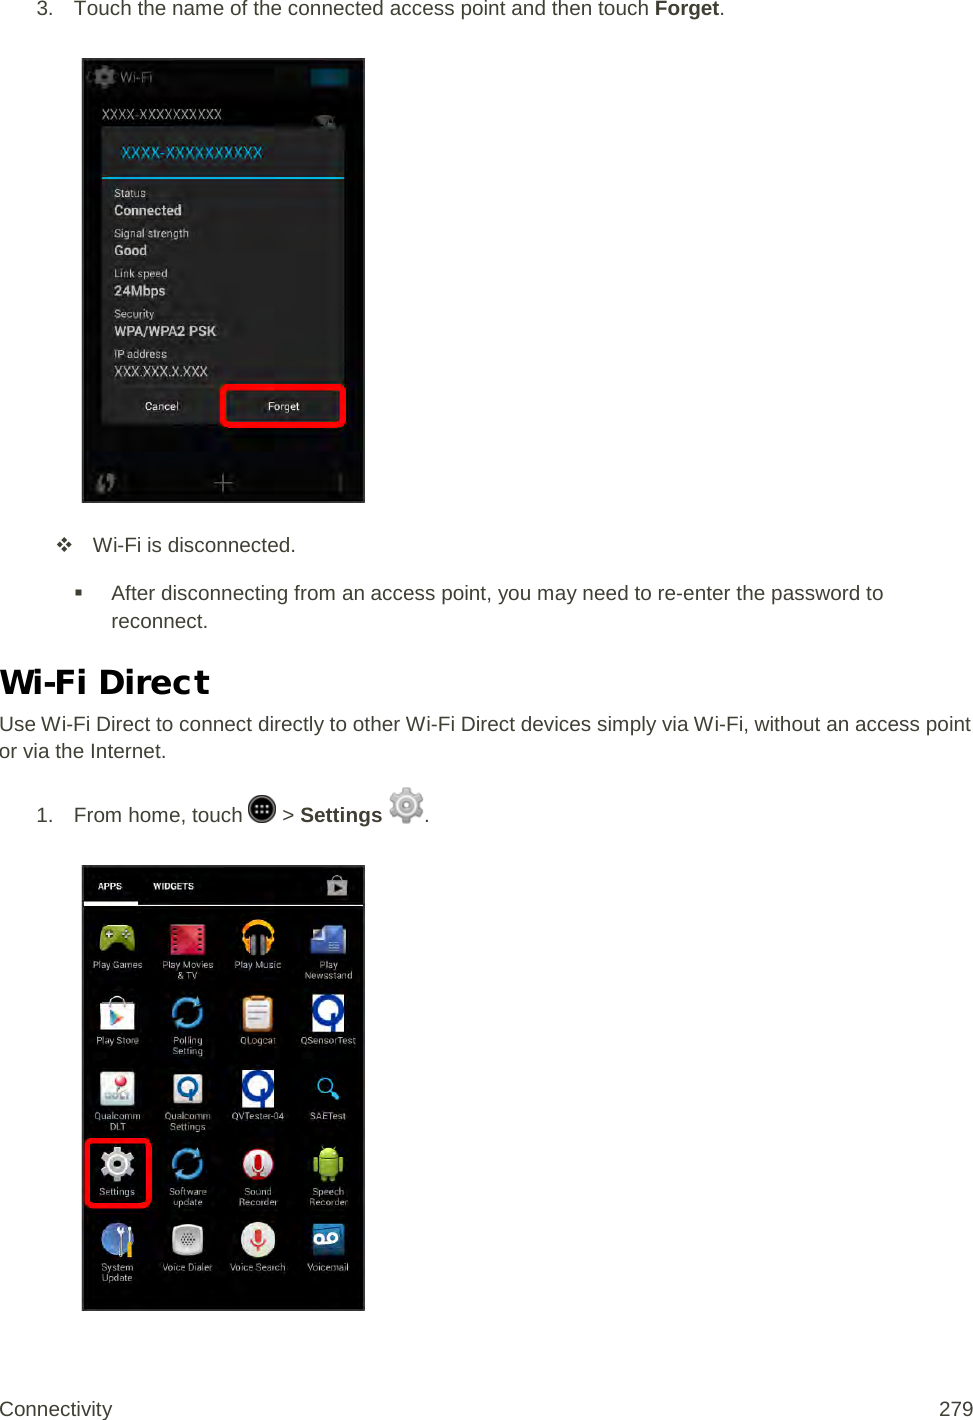 3. Touch the name of the connected access point and then touch Forget.    Wi-Fi is disconnected.  After disconnecting from an access point, you may need to re-enter the password to reconnect. Wi-Fi Direct Use Wi-Fi Direct to connect directly to other Wi-Fi Direct devices simply via Wi-Fi, without an access point or via the Internet. 1.  From home, touch   &gt; Settings  .   Connectivity 279   